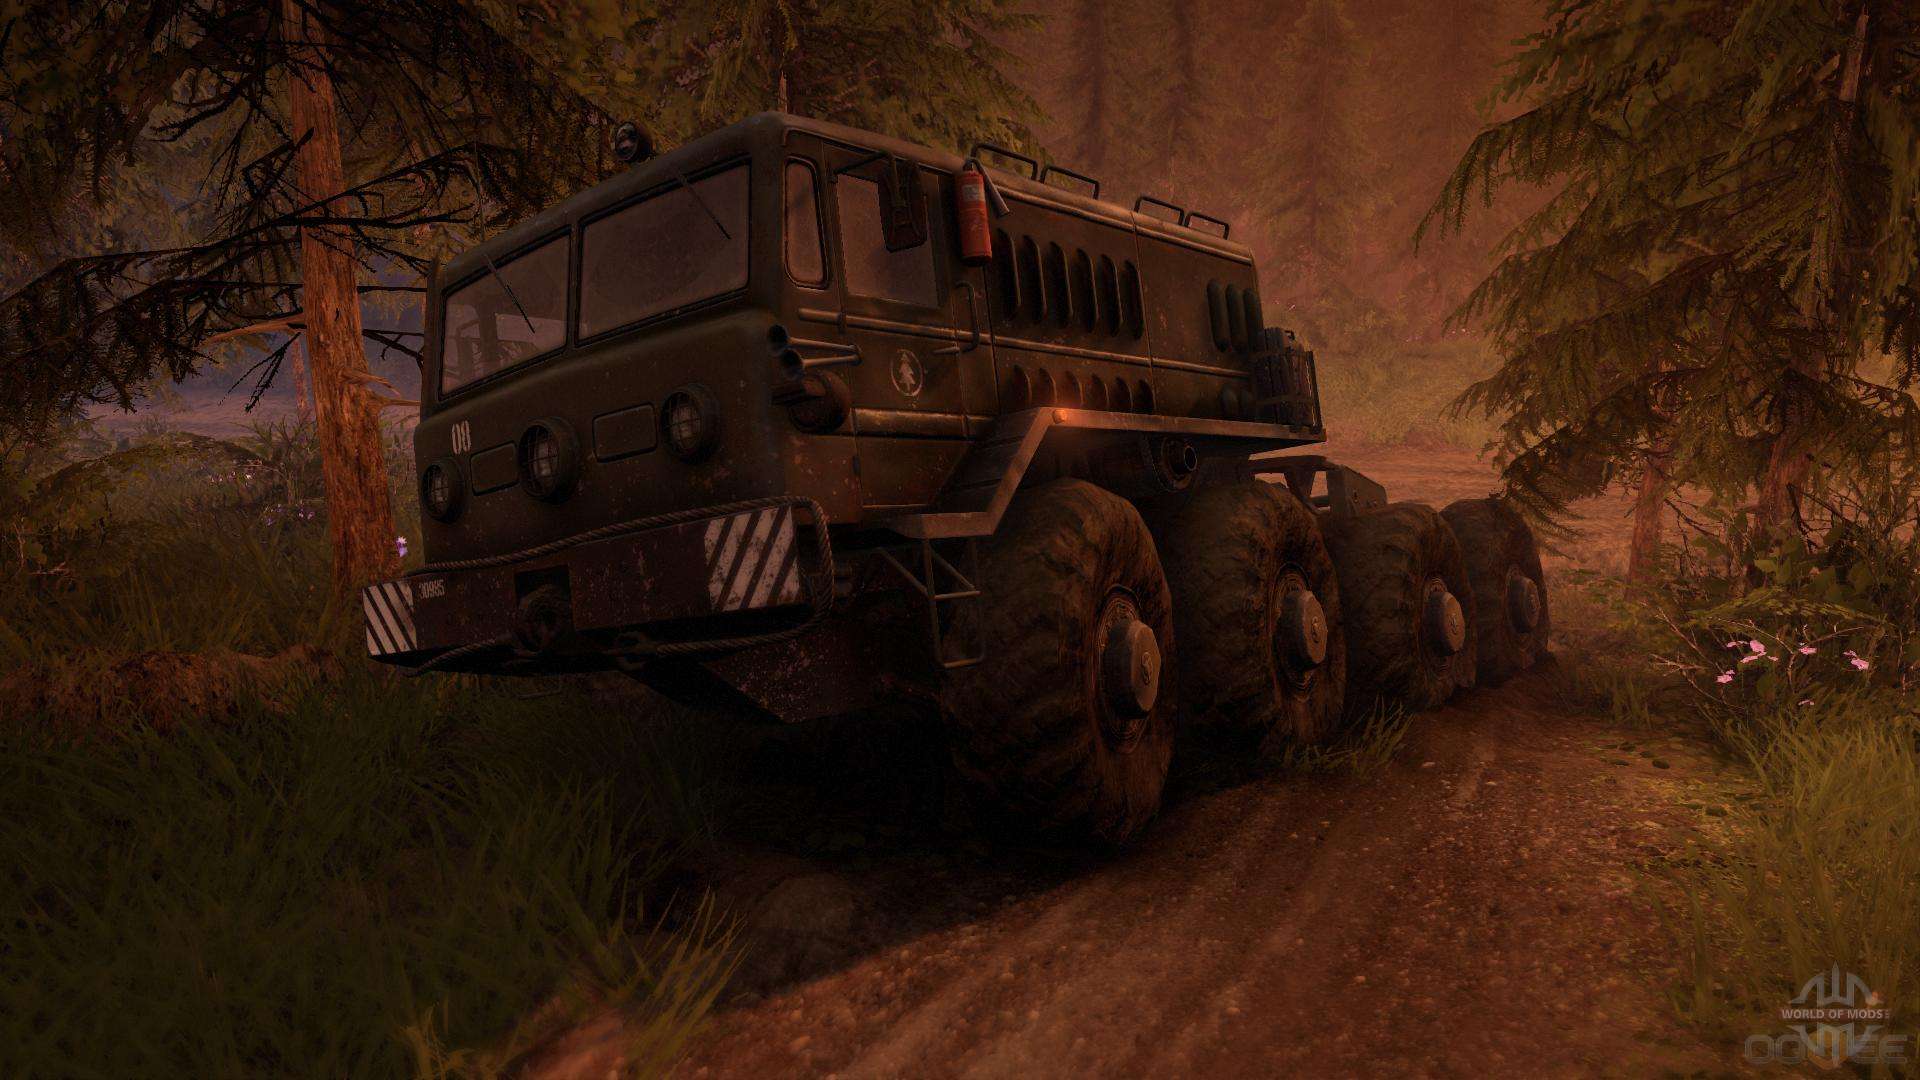 Mad runner expedition. SPINTIRES 06.06.13. Spin Tires Шерп. SPINTIRES Tech Demo. D 535 MUDRUNNER.